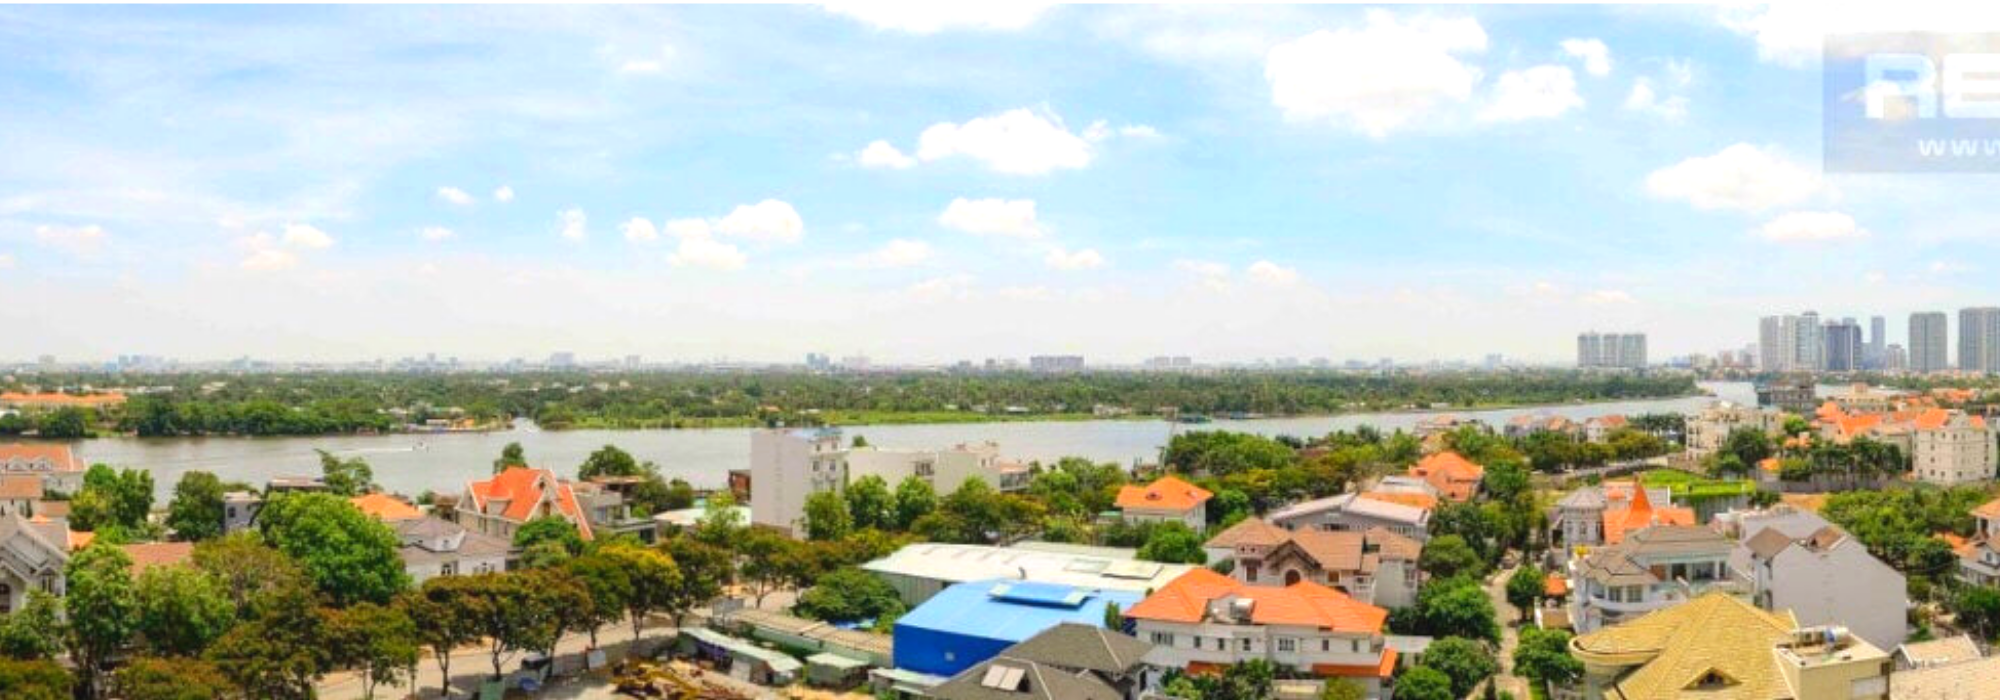 For rent 3 Bedroom Apartment, Xi Riverview Palace